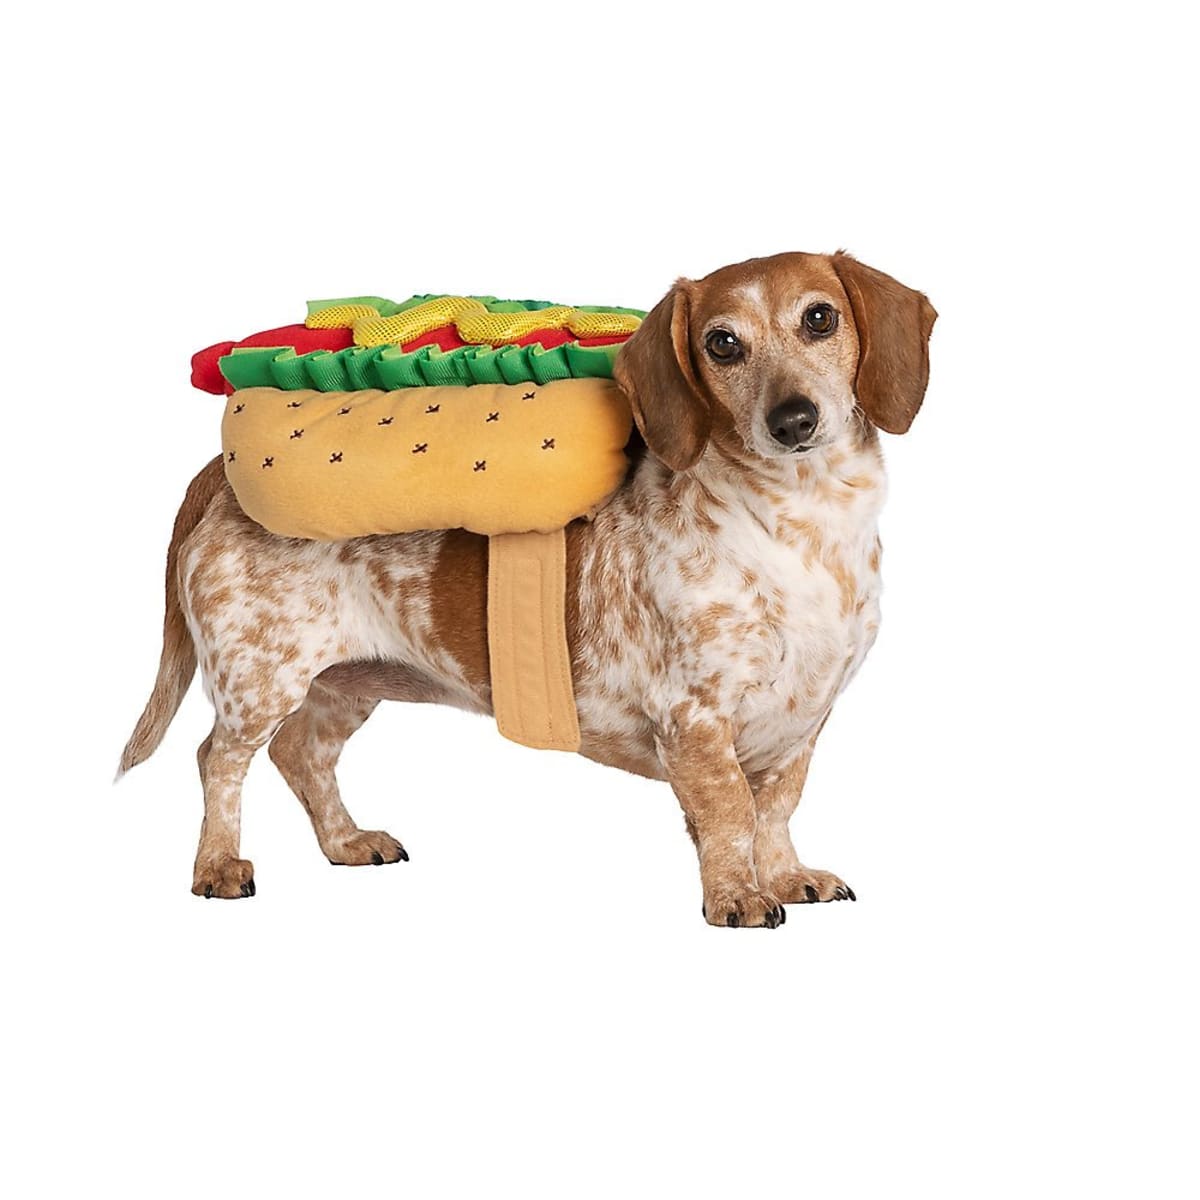 40 Best Dog Halloween Costumes (2021) — Cute Dog Costumes for Halloween -  Parade Pets